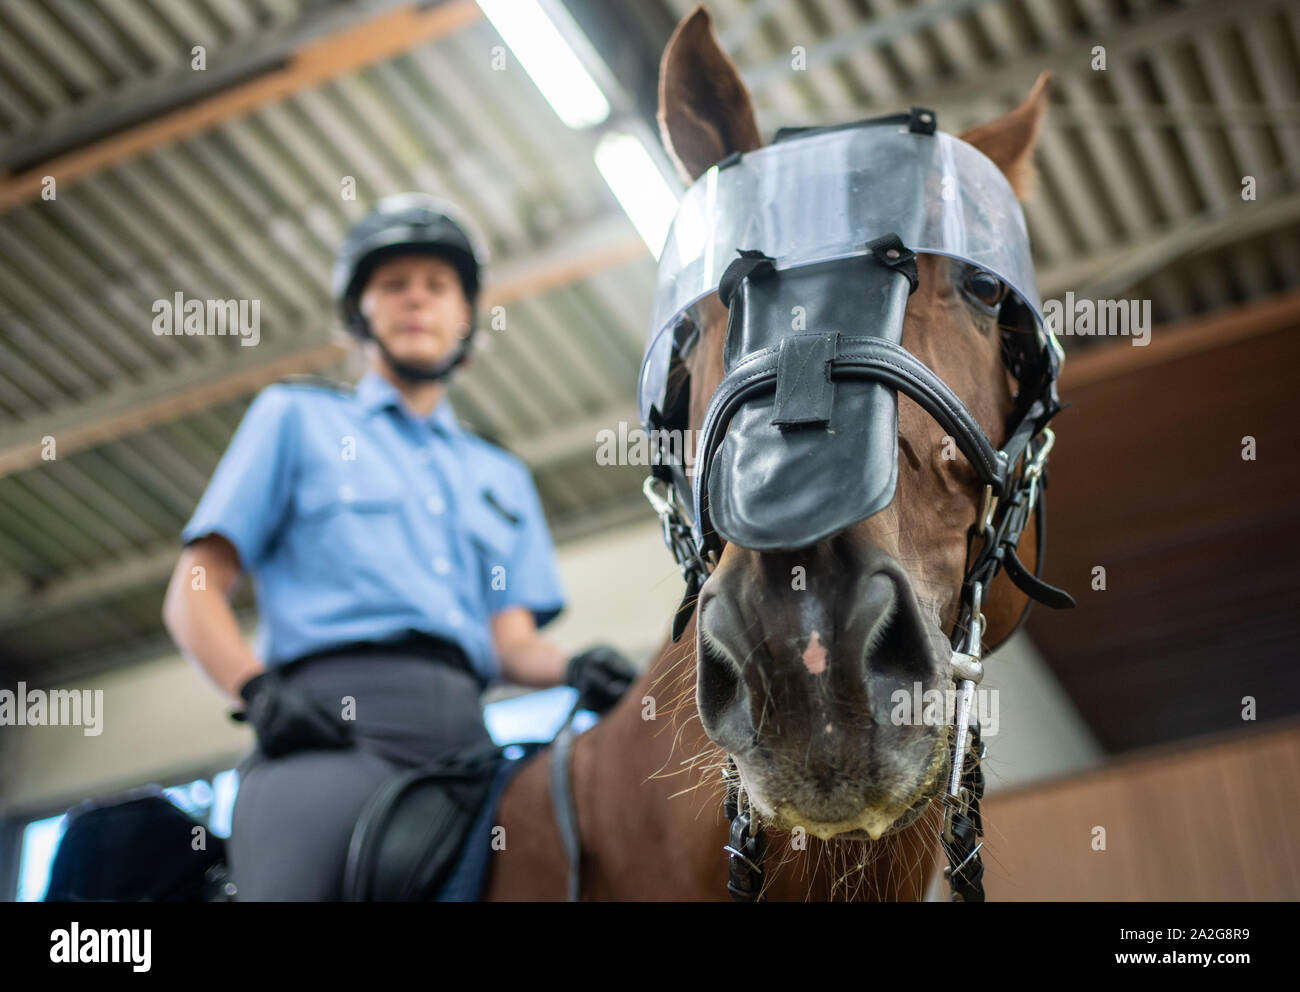 27 September 2019, Hessen, Frankfurt/Main: With a special cuff for nose and eyes the horses of the police riding squadron Hessen are protected with missions. The animals are accustomed from the outset to reacting calmly to unusual events of an optical or acoustic nature. (to dpa 'Police horses are often 'last resort when it gets tight'' from 03.10.2019) Photo: Frank Rumpenhorst/dpa Stock Photo